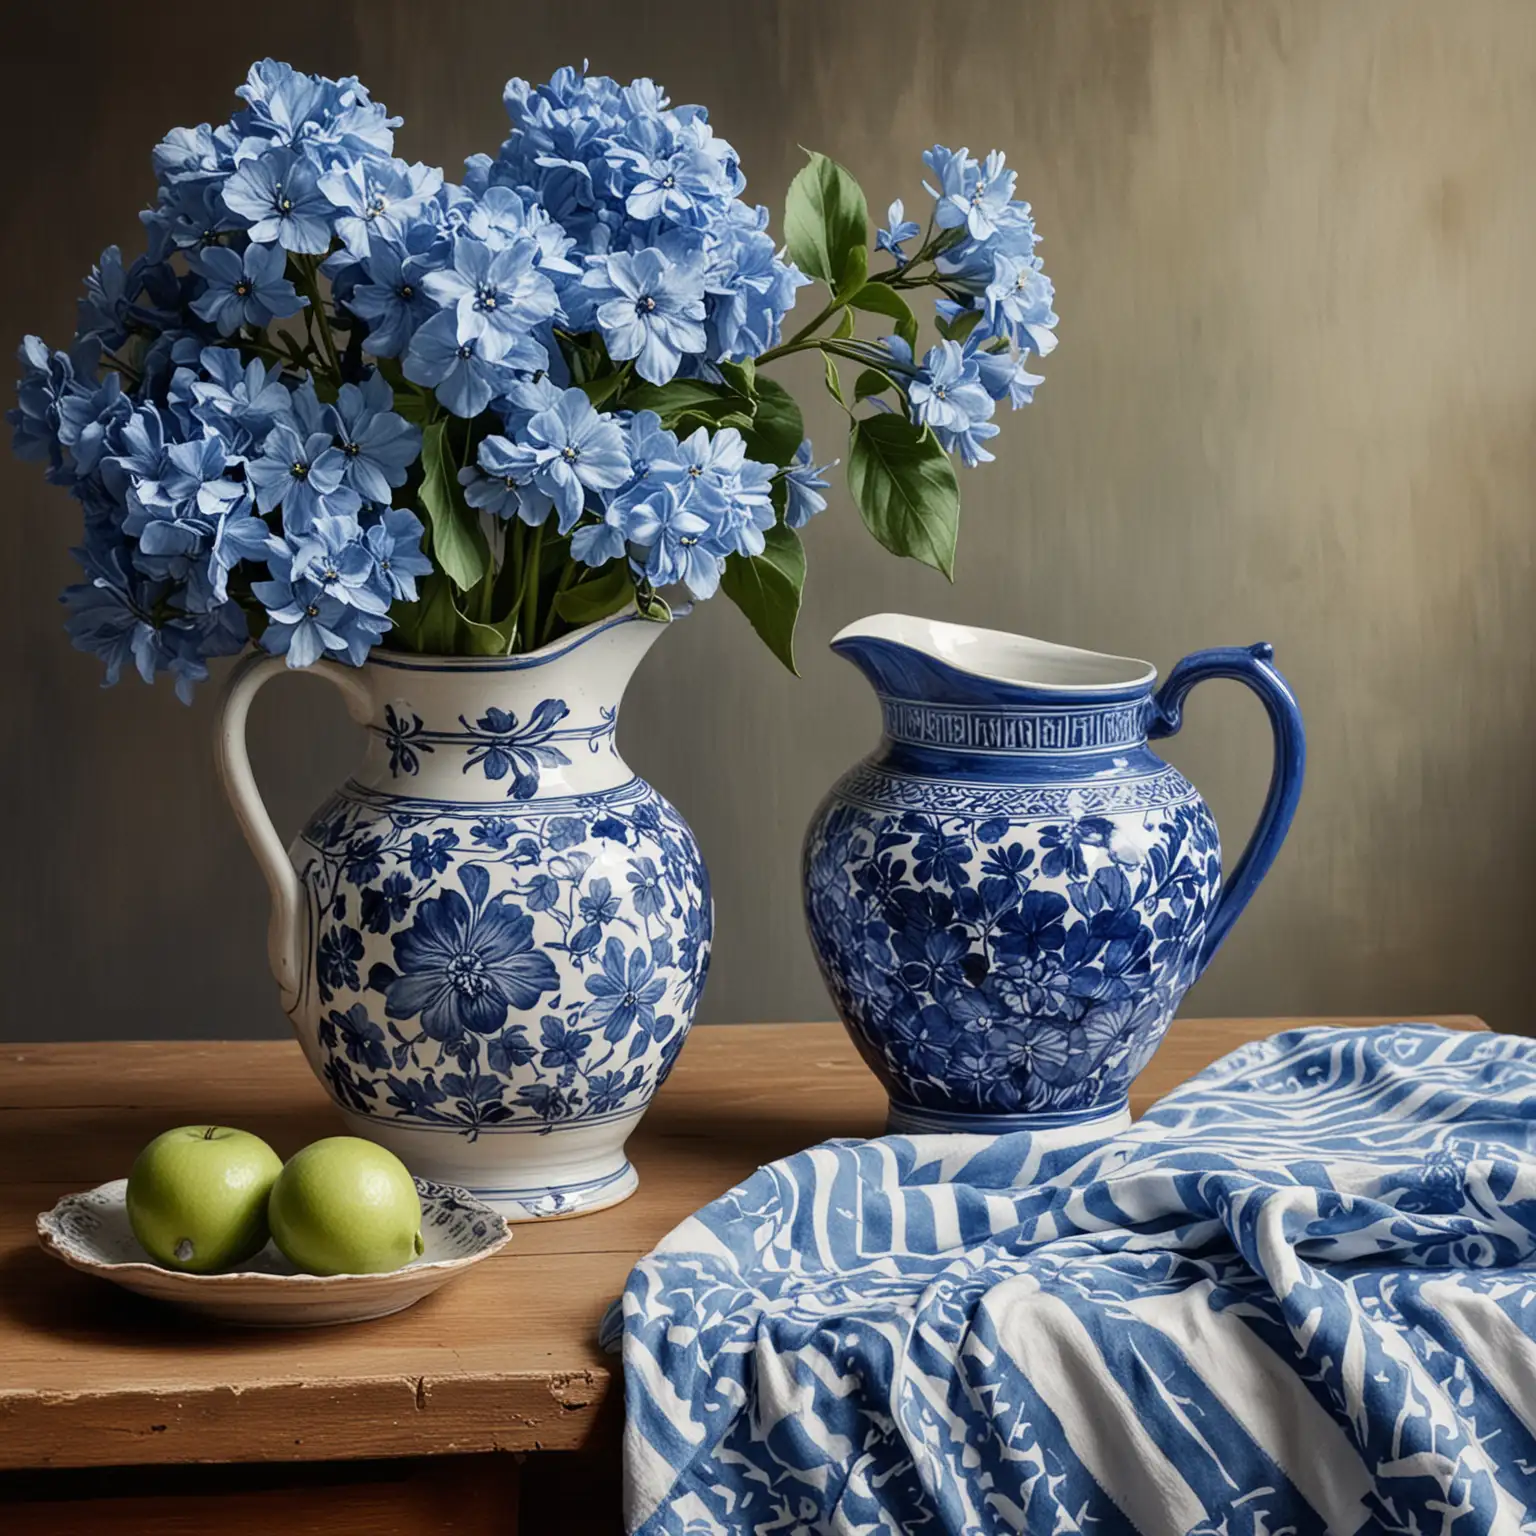 Blue and White Still Life Painting with Hydrangeas and Pottery on Table